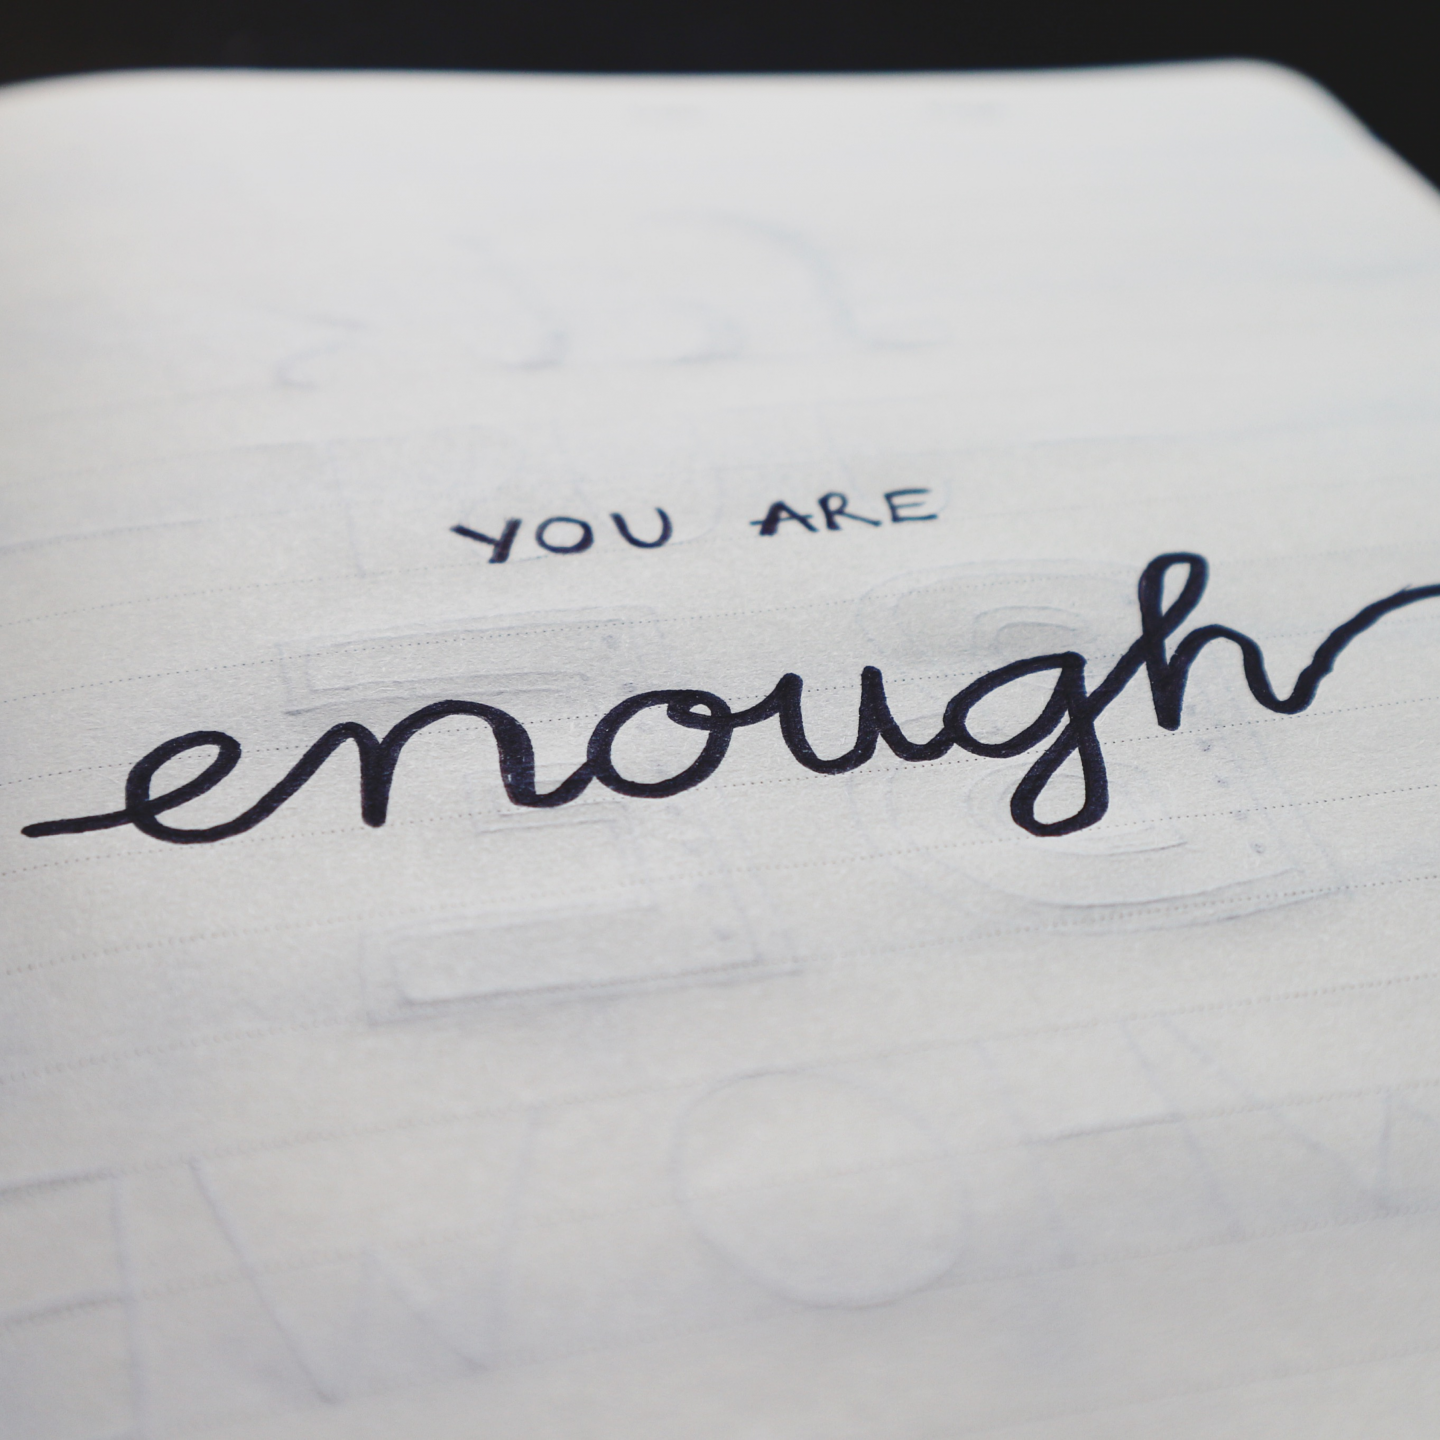 'You are enough' handwritten on paper